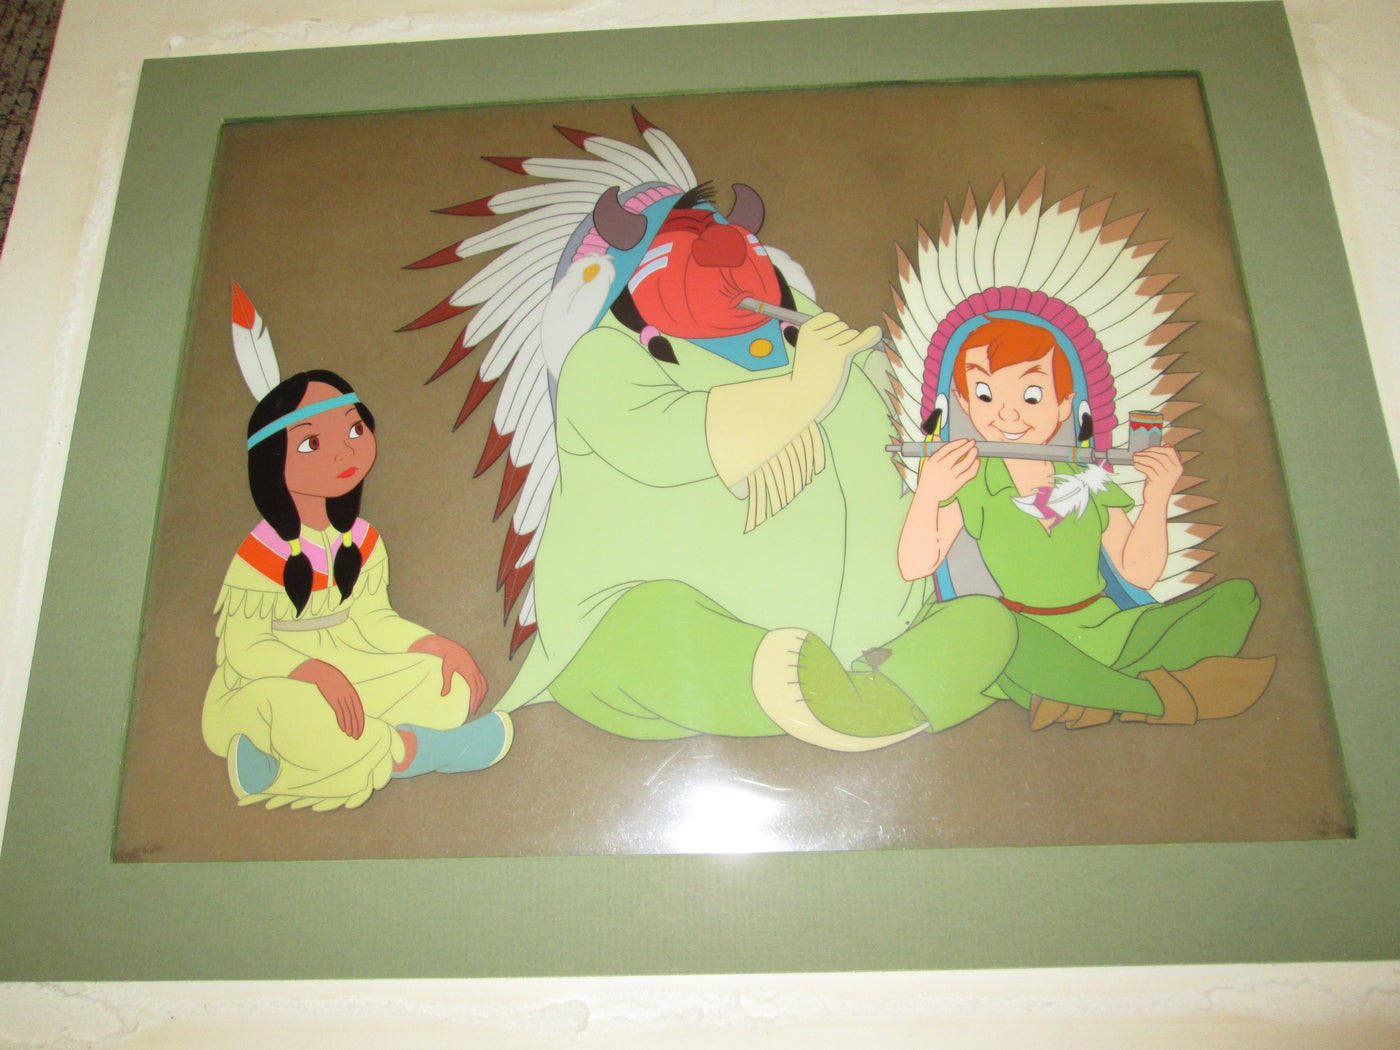 Original Walt Disney Production Cel From Peter Pan Featuring Tiger Lily, Peter Pan and Great Big Little Panther